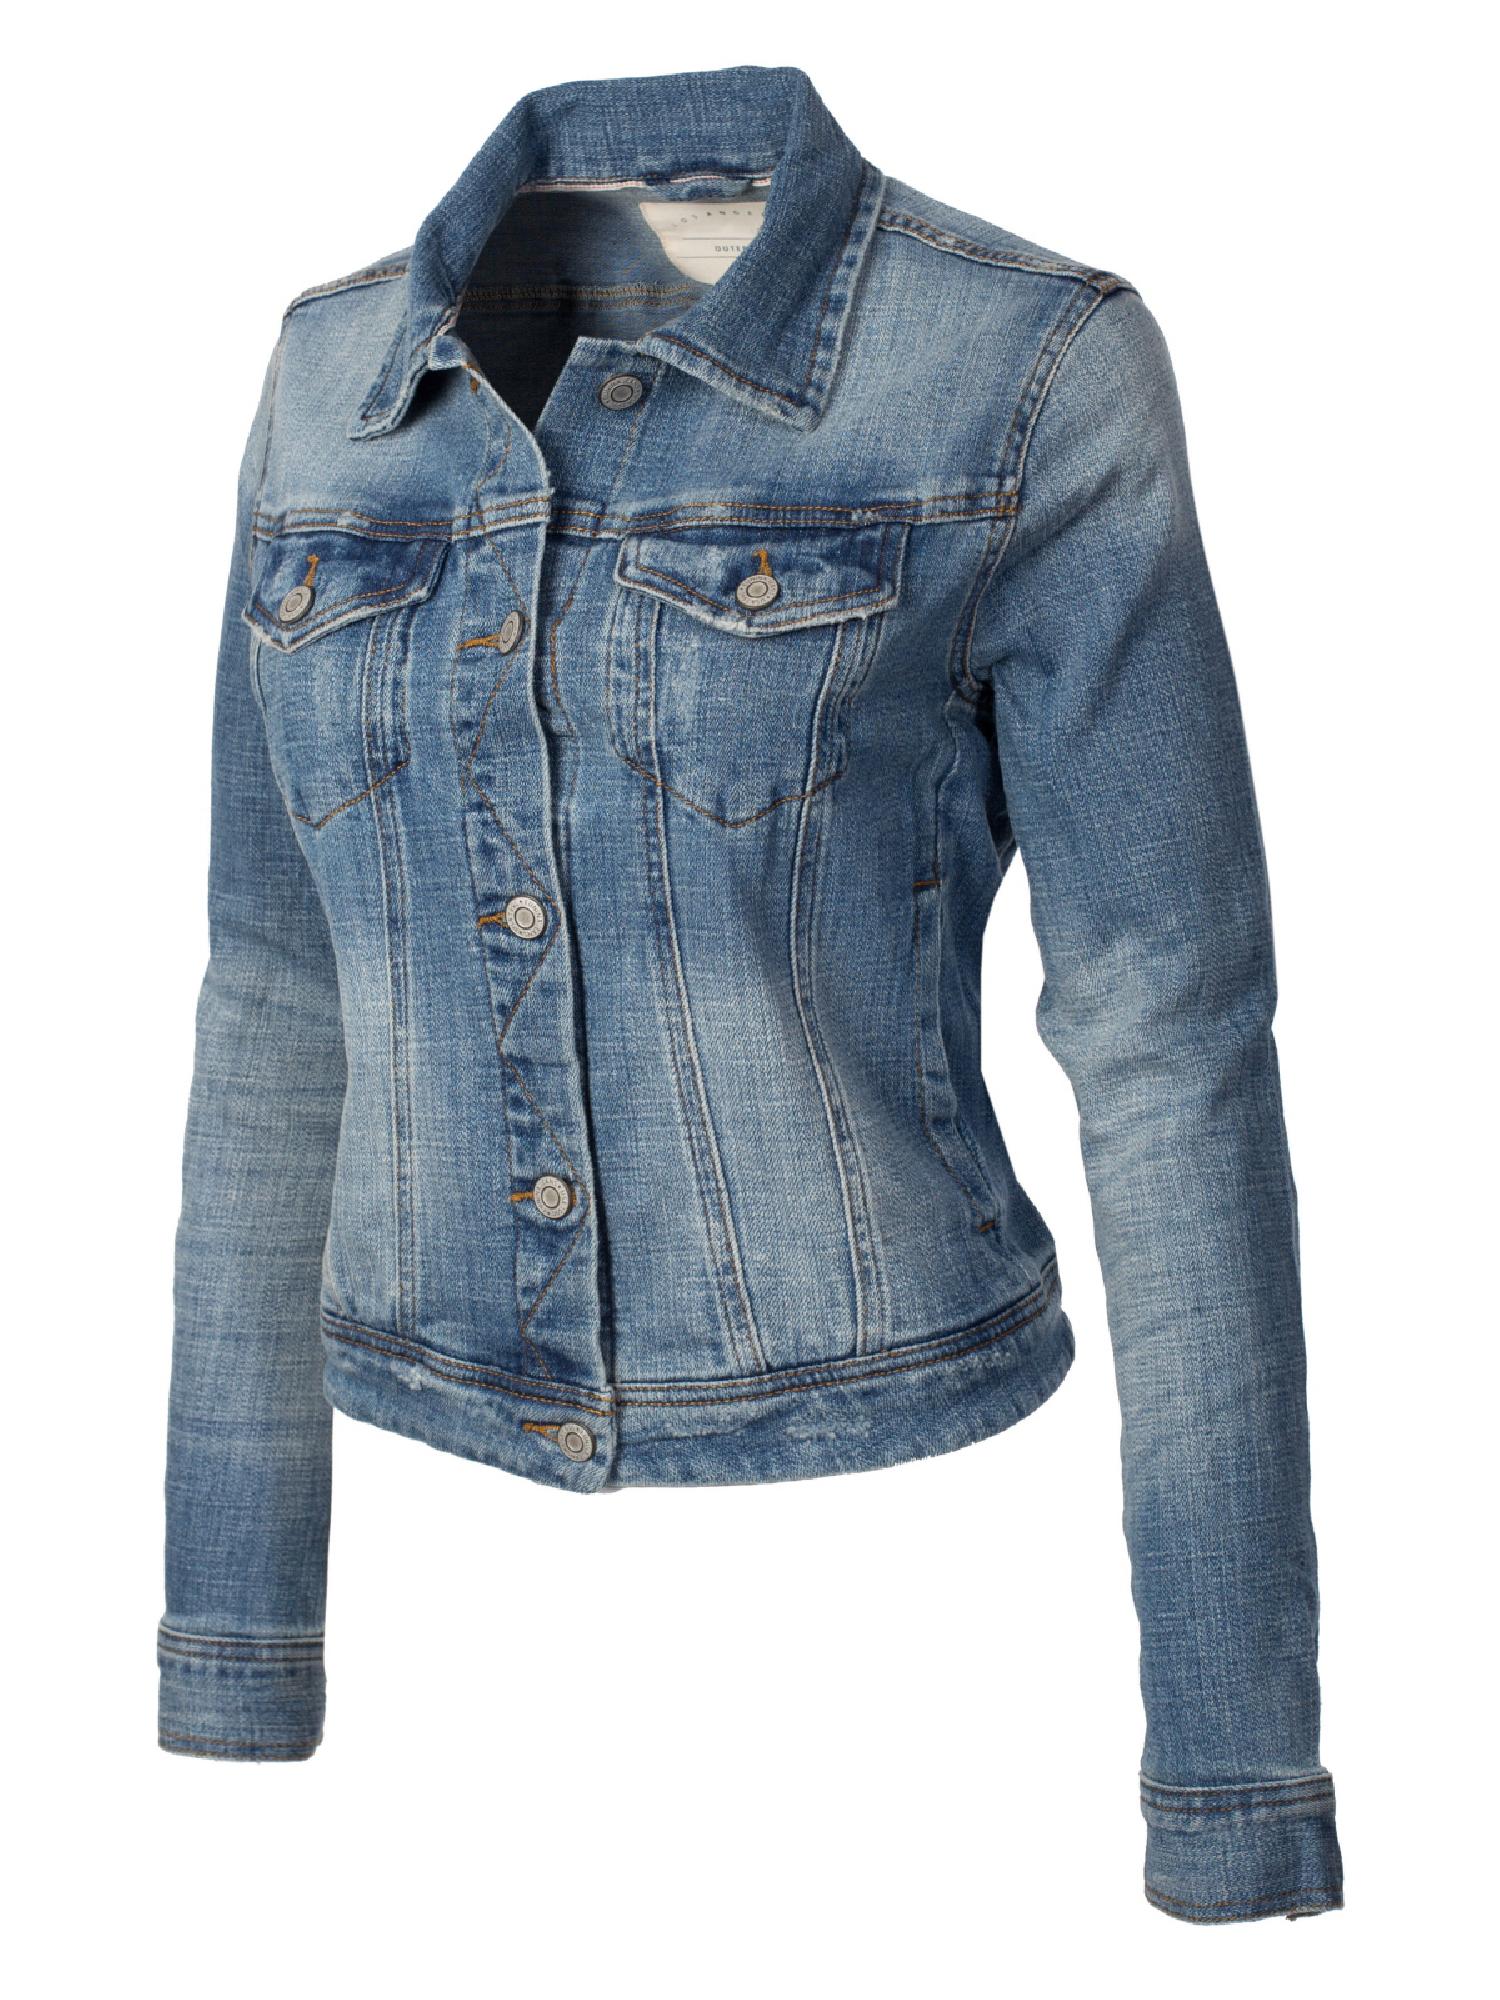 Made by Olivia Women's Classic Casual Vintage Denim Jean Jacket - image 3 of 5